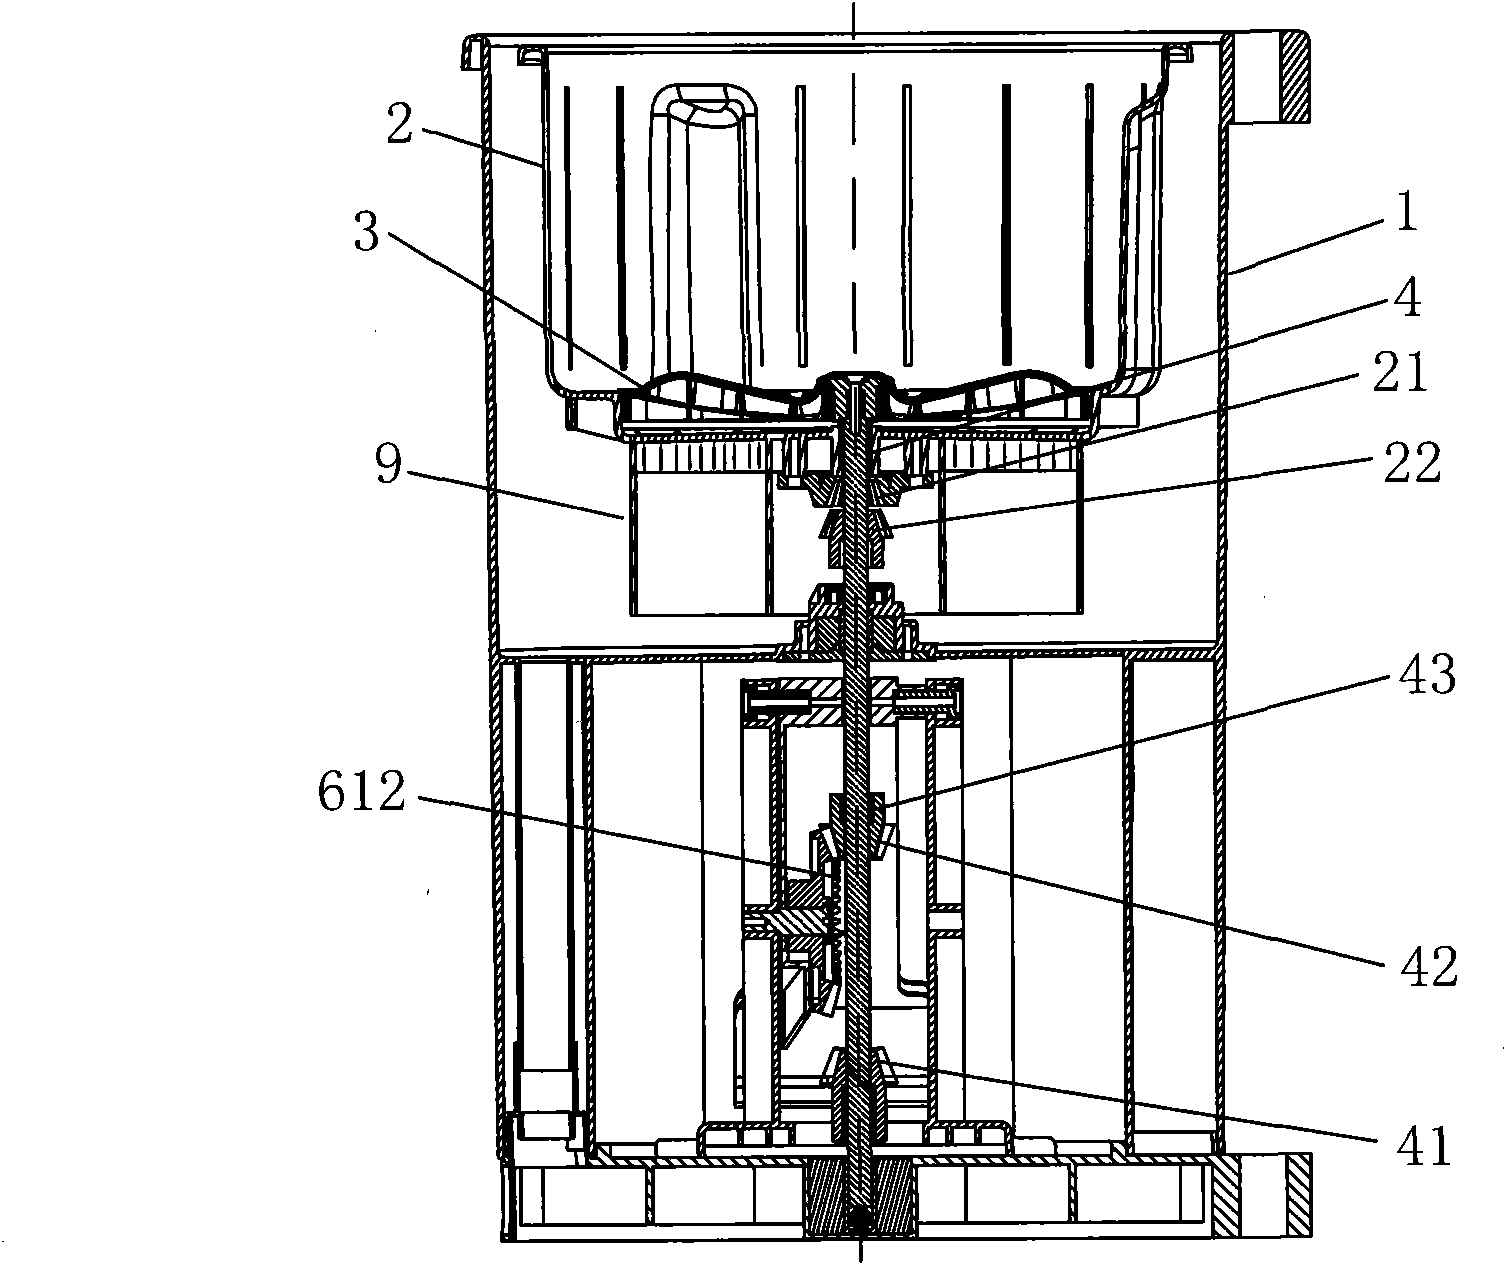 Transmission device of foot-operated washing machine